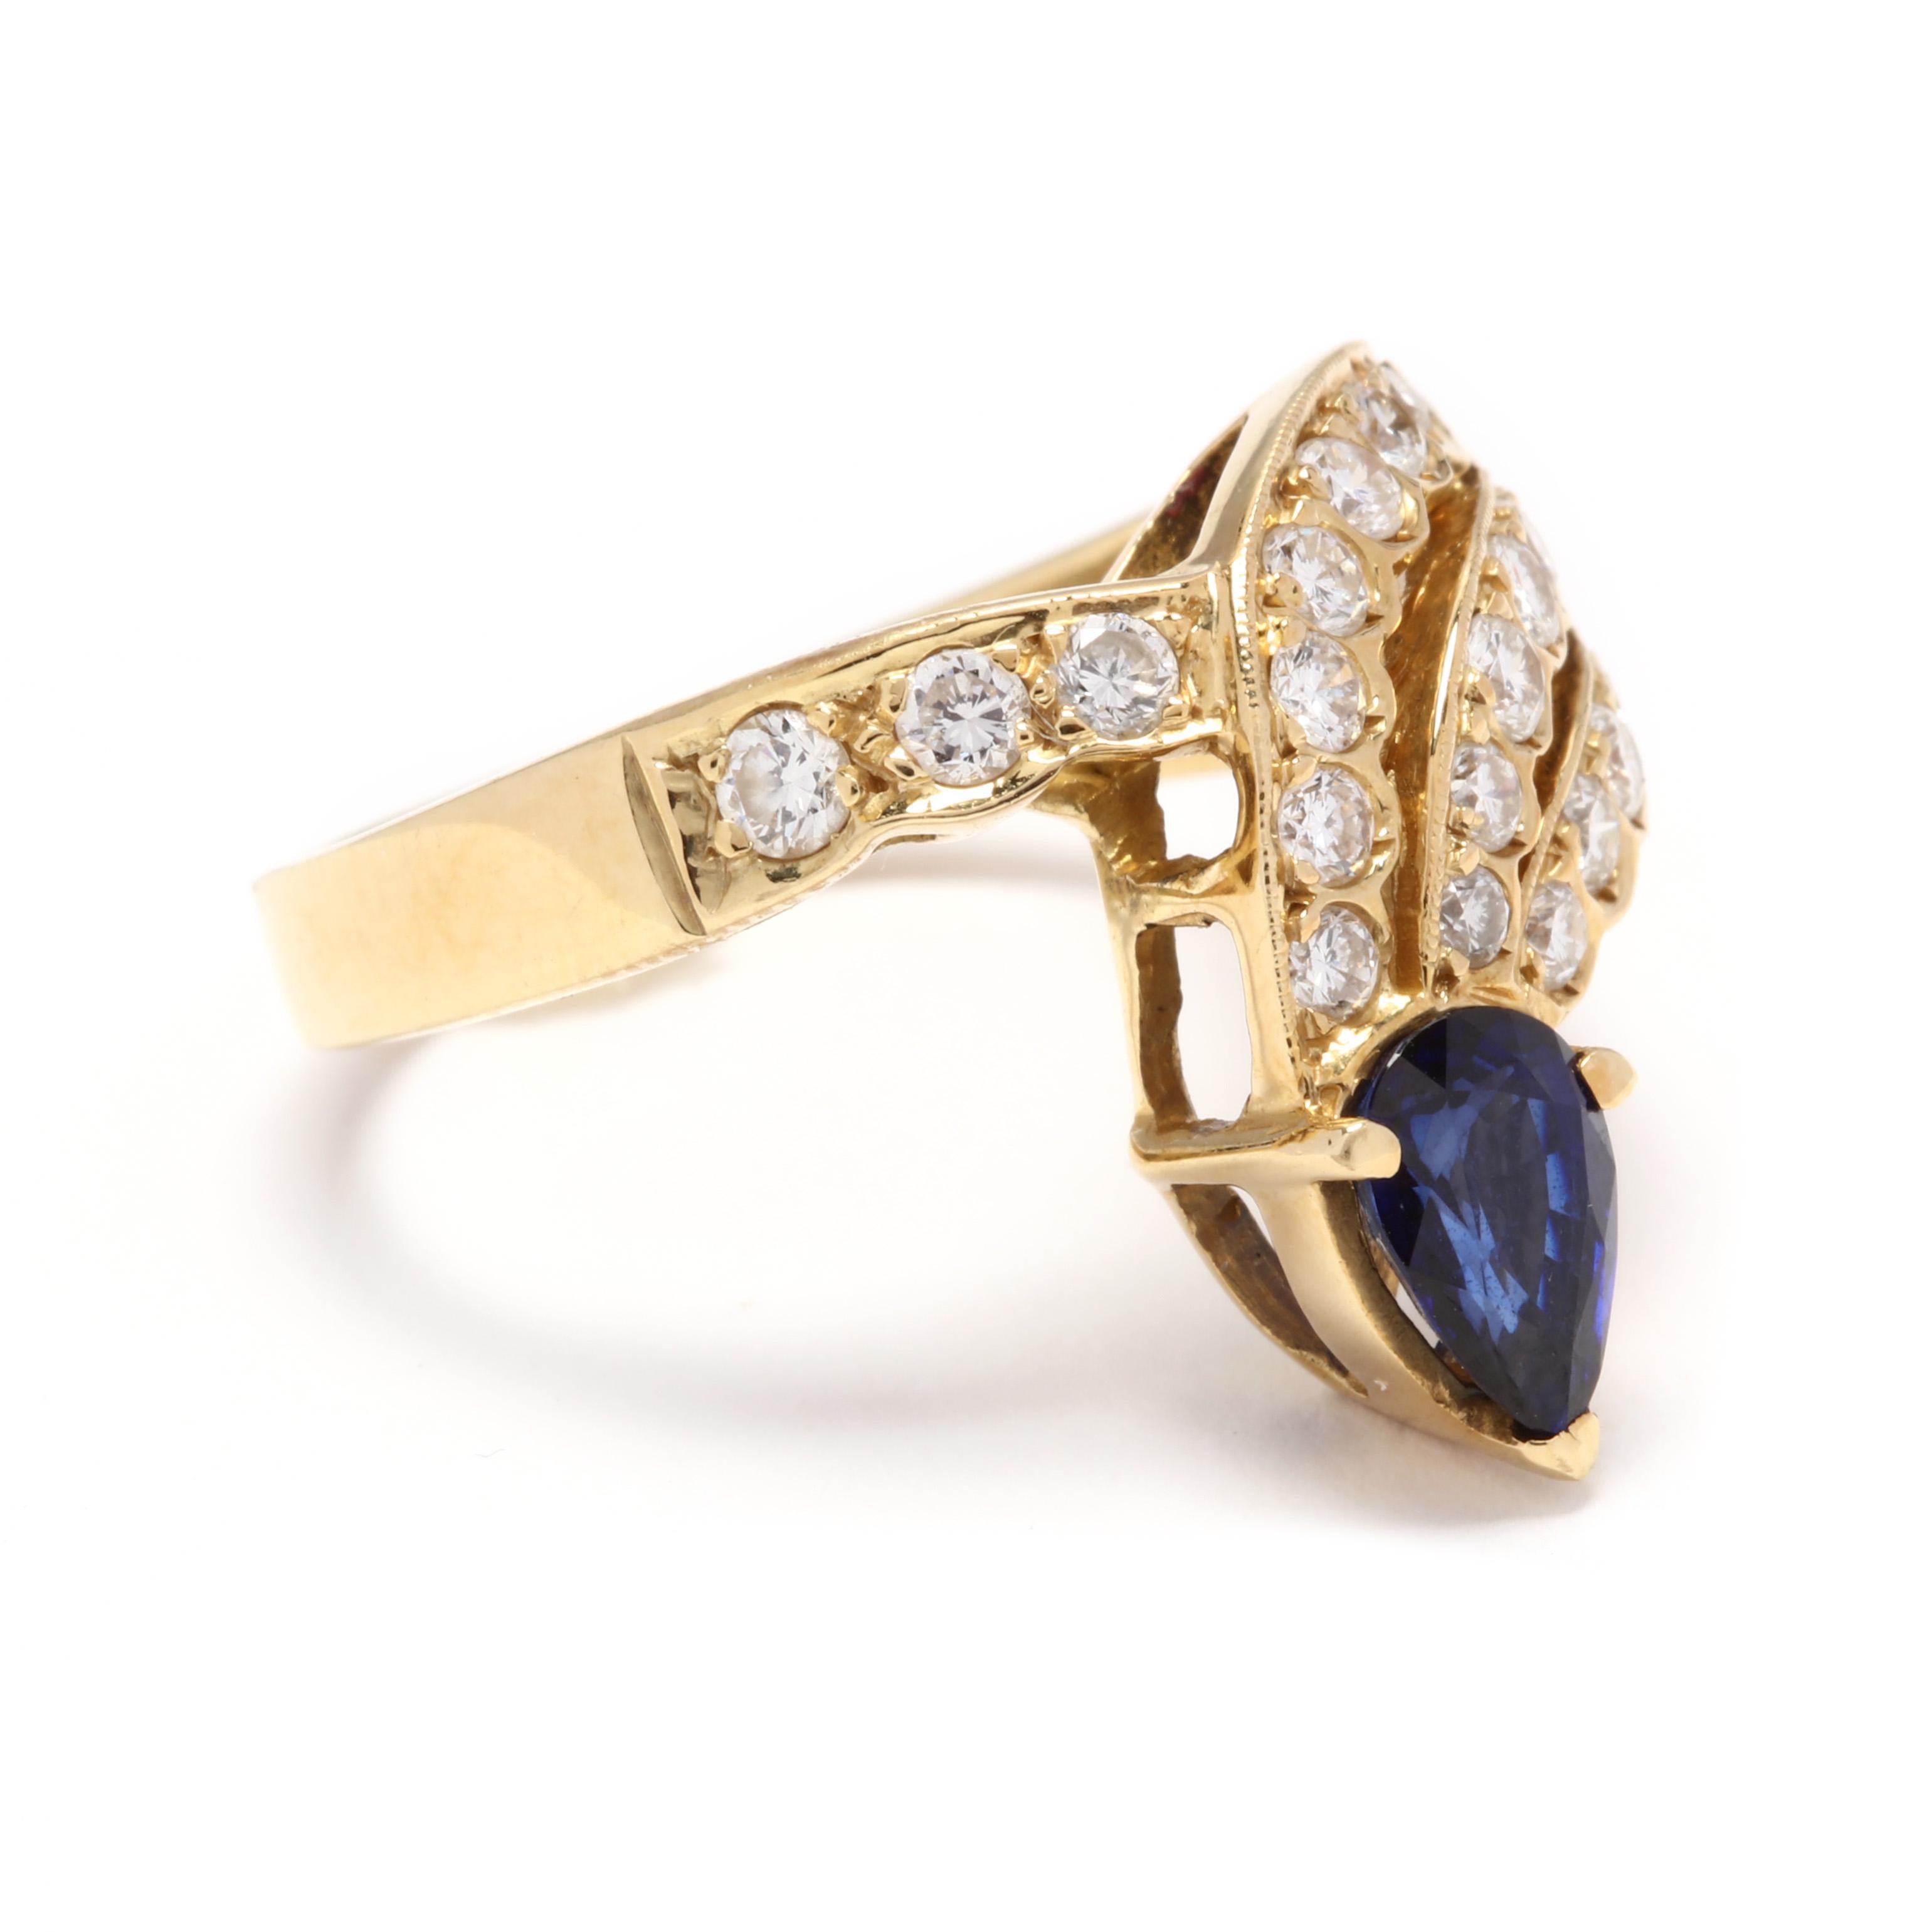 An 18 karat yellow gold, sapphire and diamond cocktail ring. In a bypass style design with a scalloped, single and triple row of full cut diamonds weighing approximately .81 total carats leading to a prong set, pear cut sapphire weighing